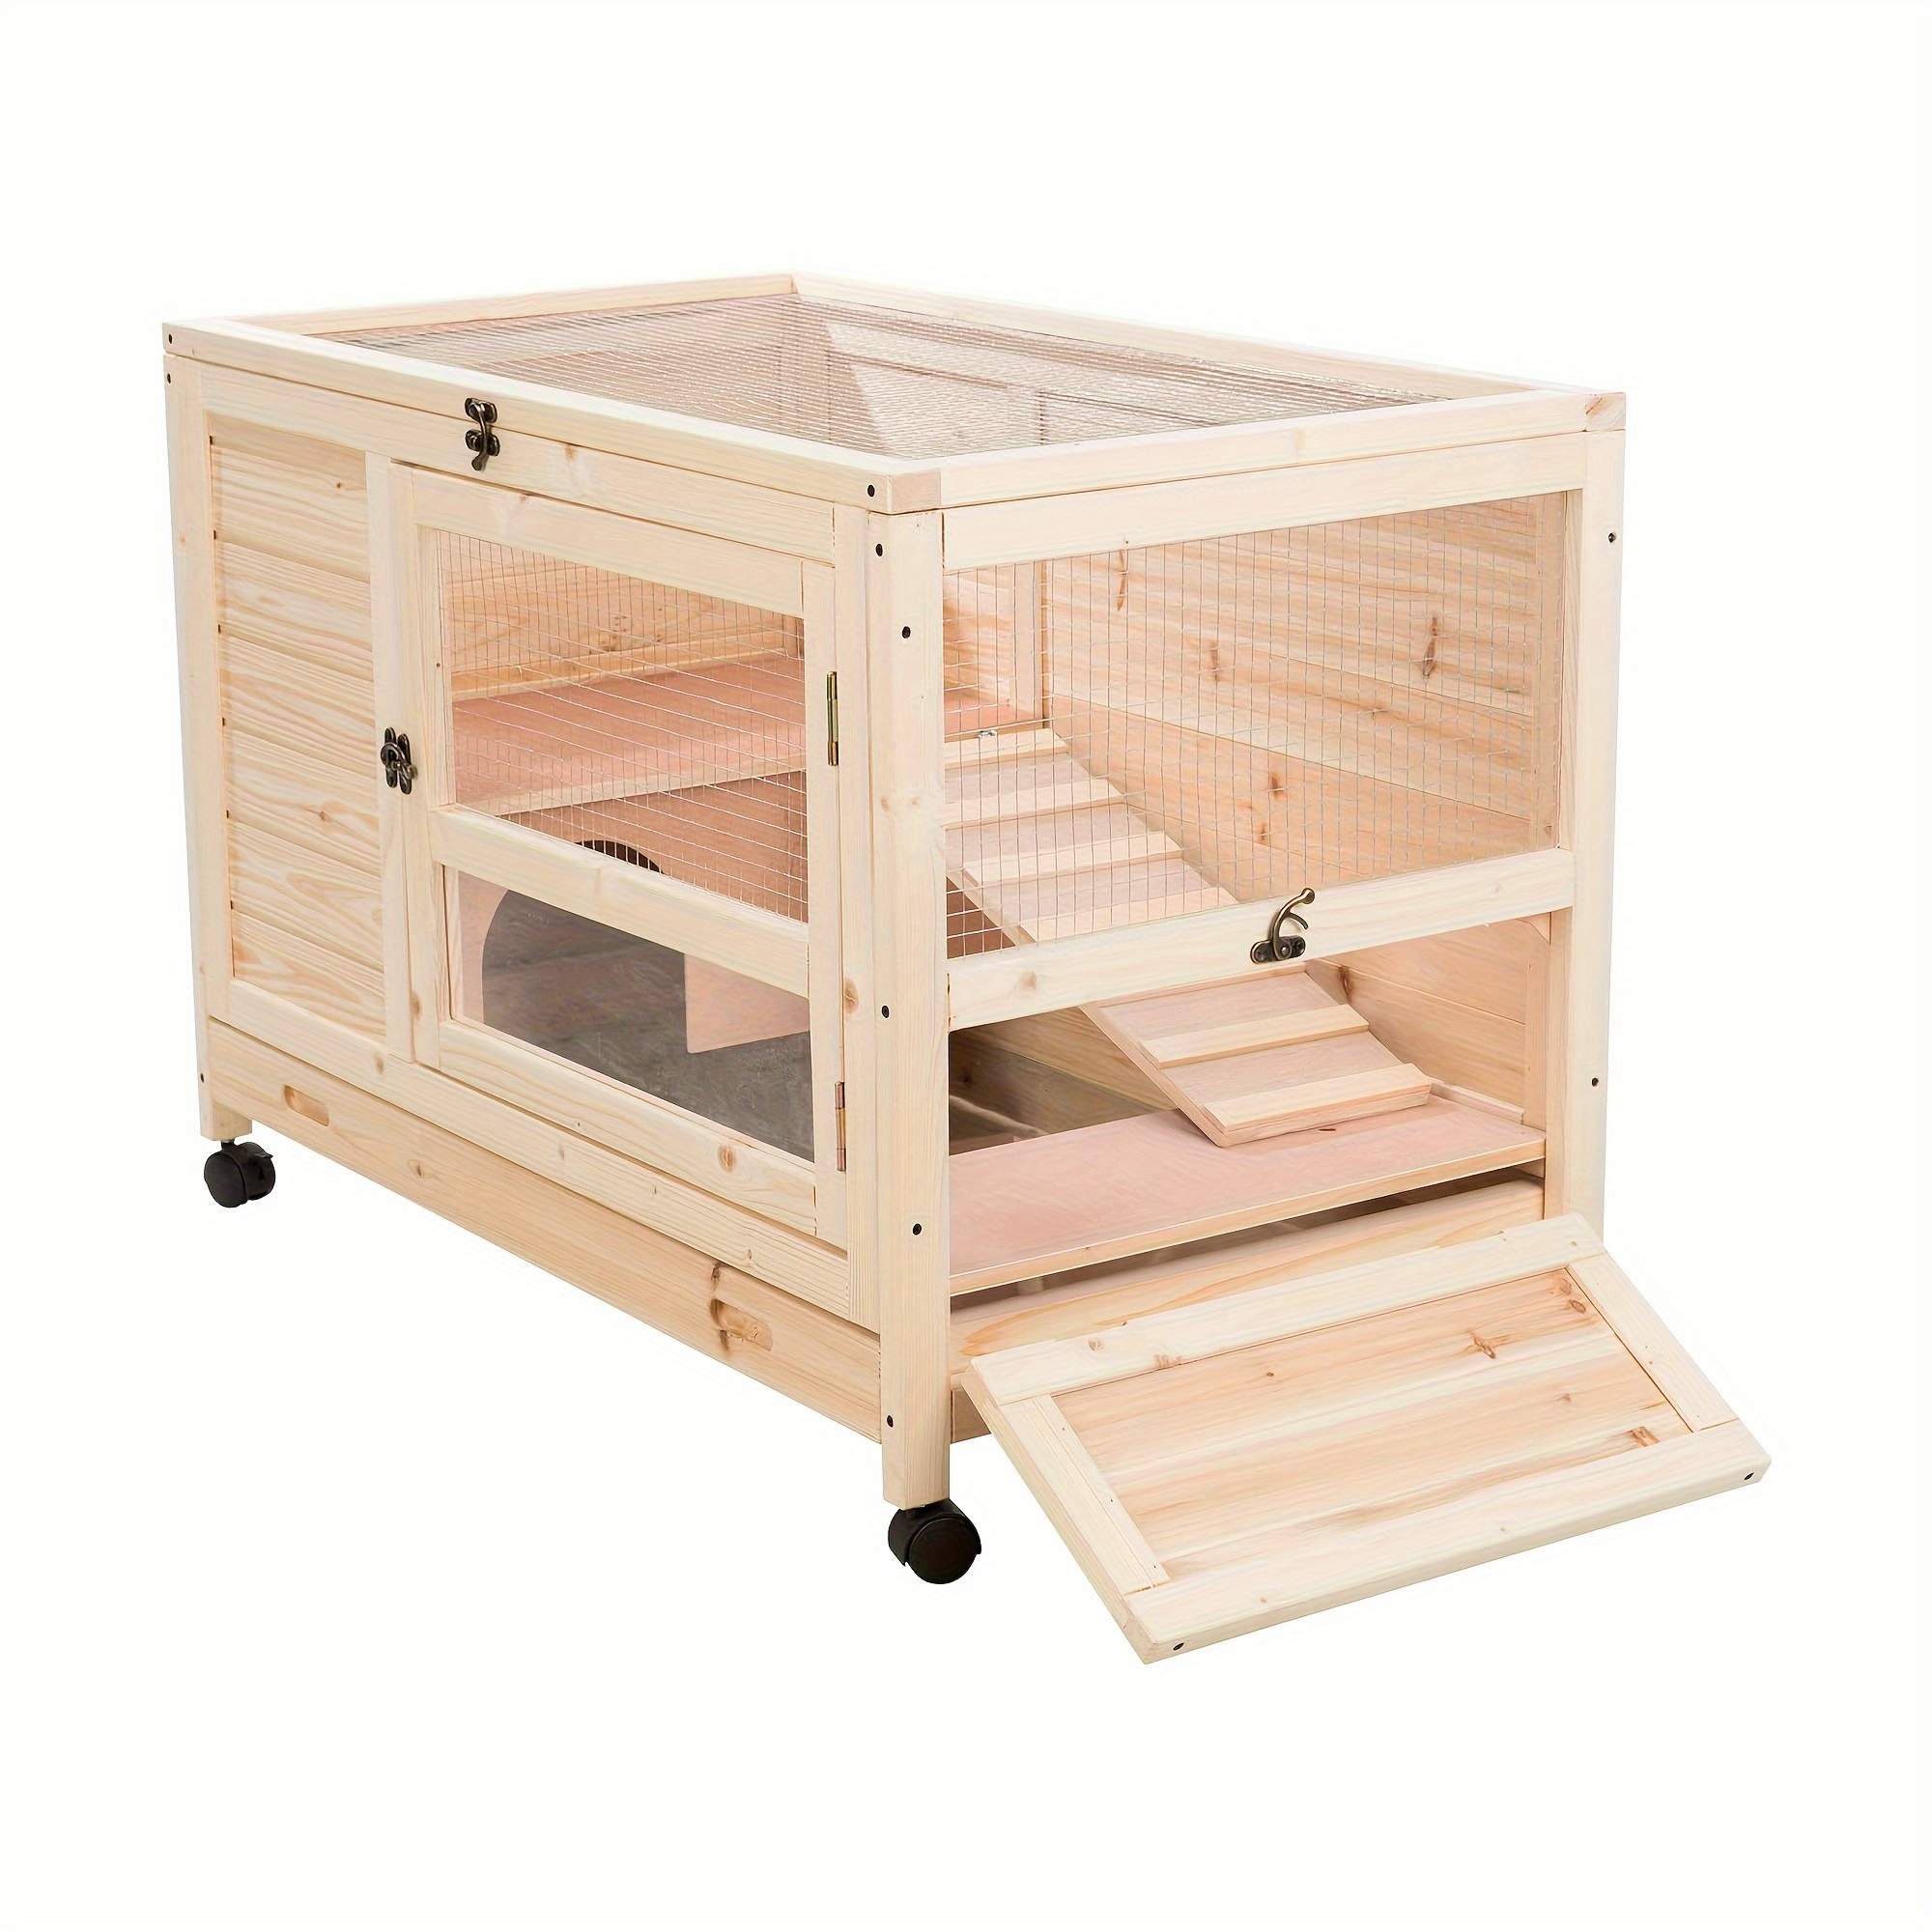 wooden rabbit hutch outdoor indoor bunny cage with pull out tray two story animal house pet shelter fir wood bunny home with wheels size 53x35x63 5 inches